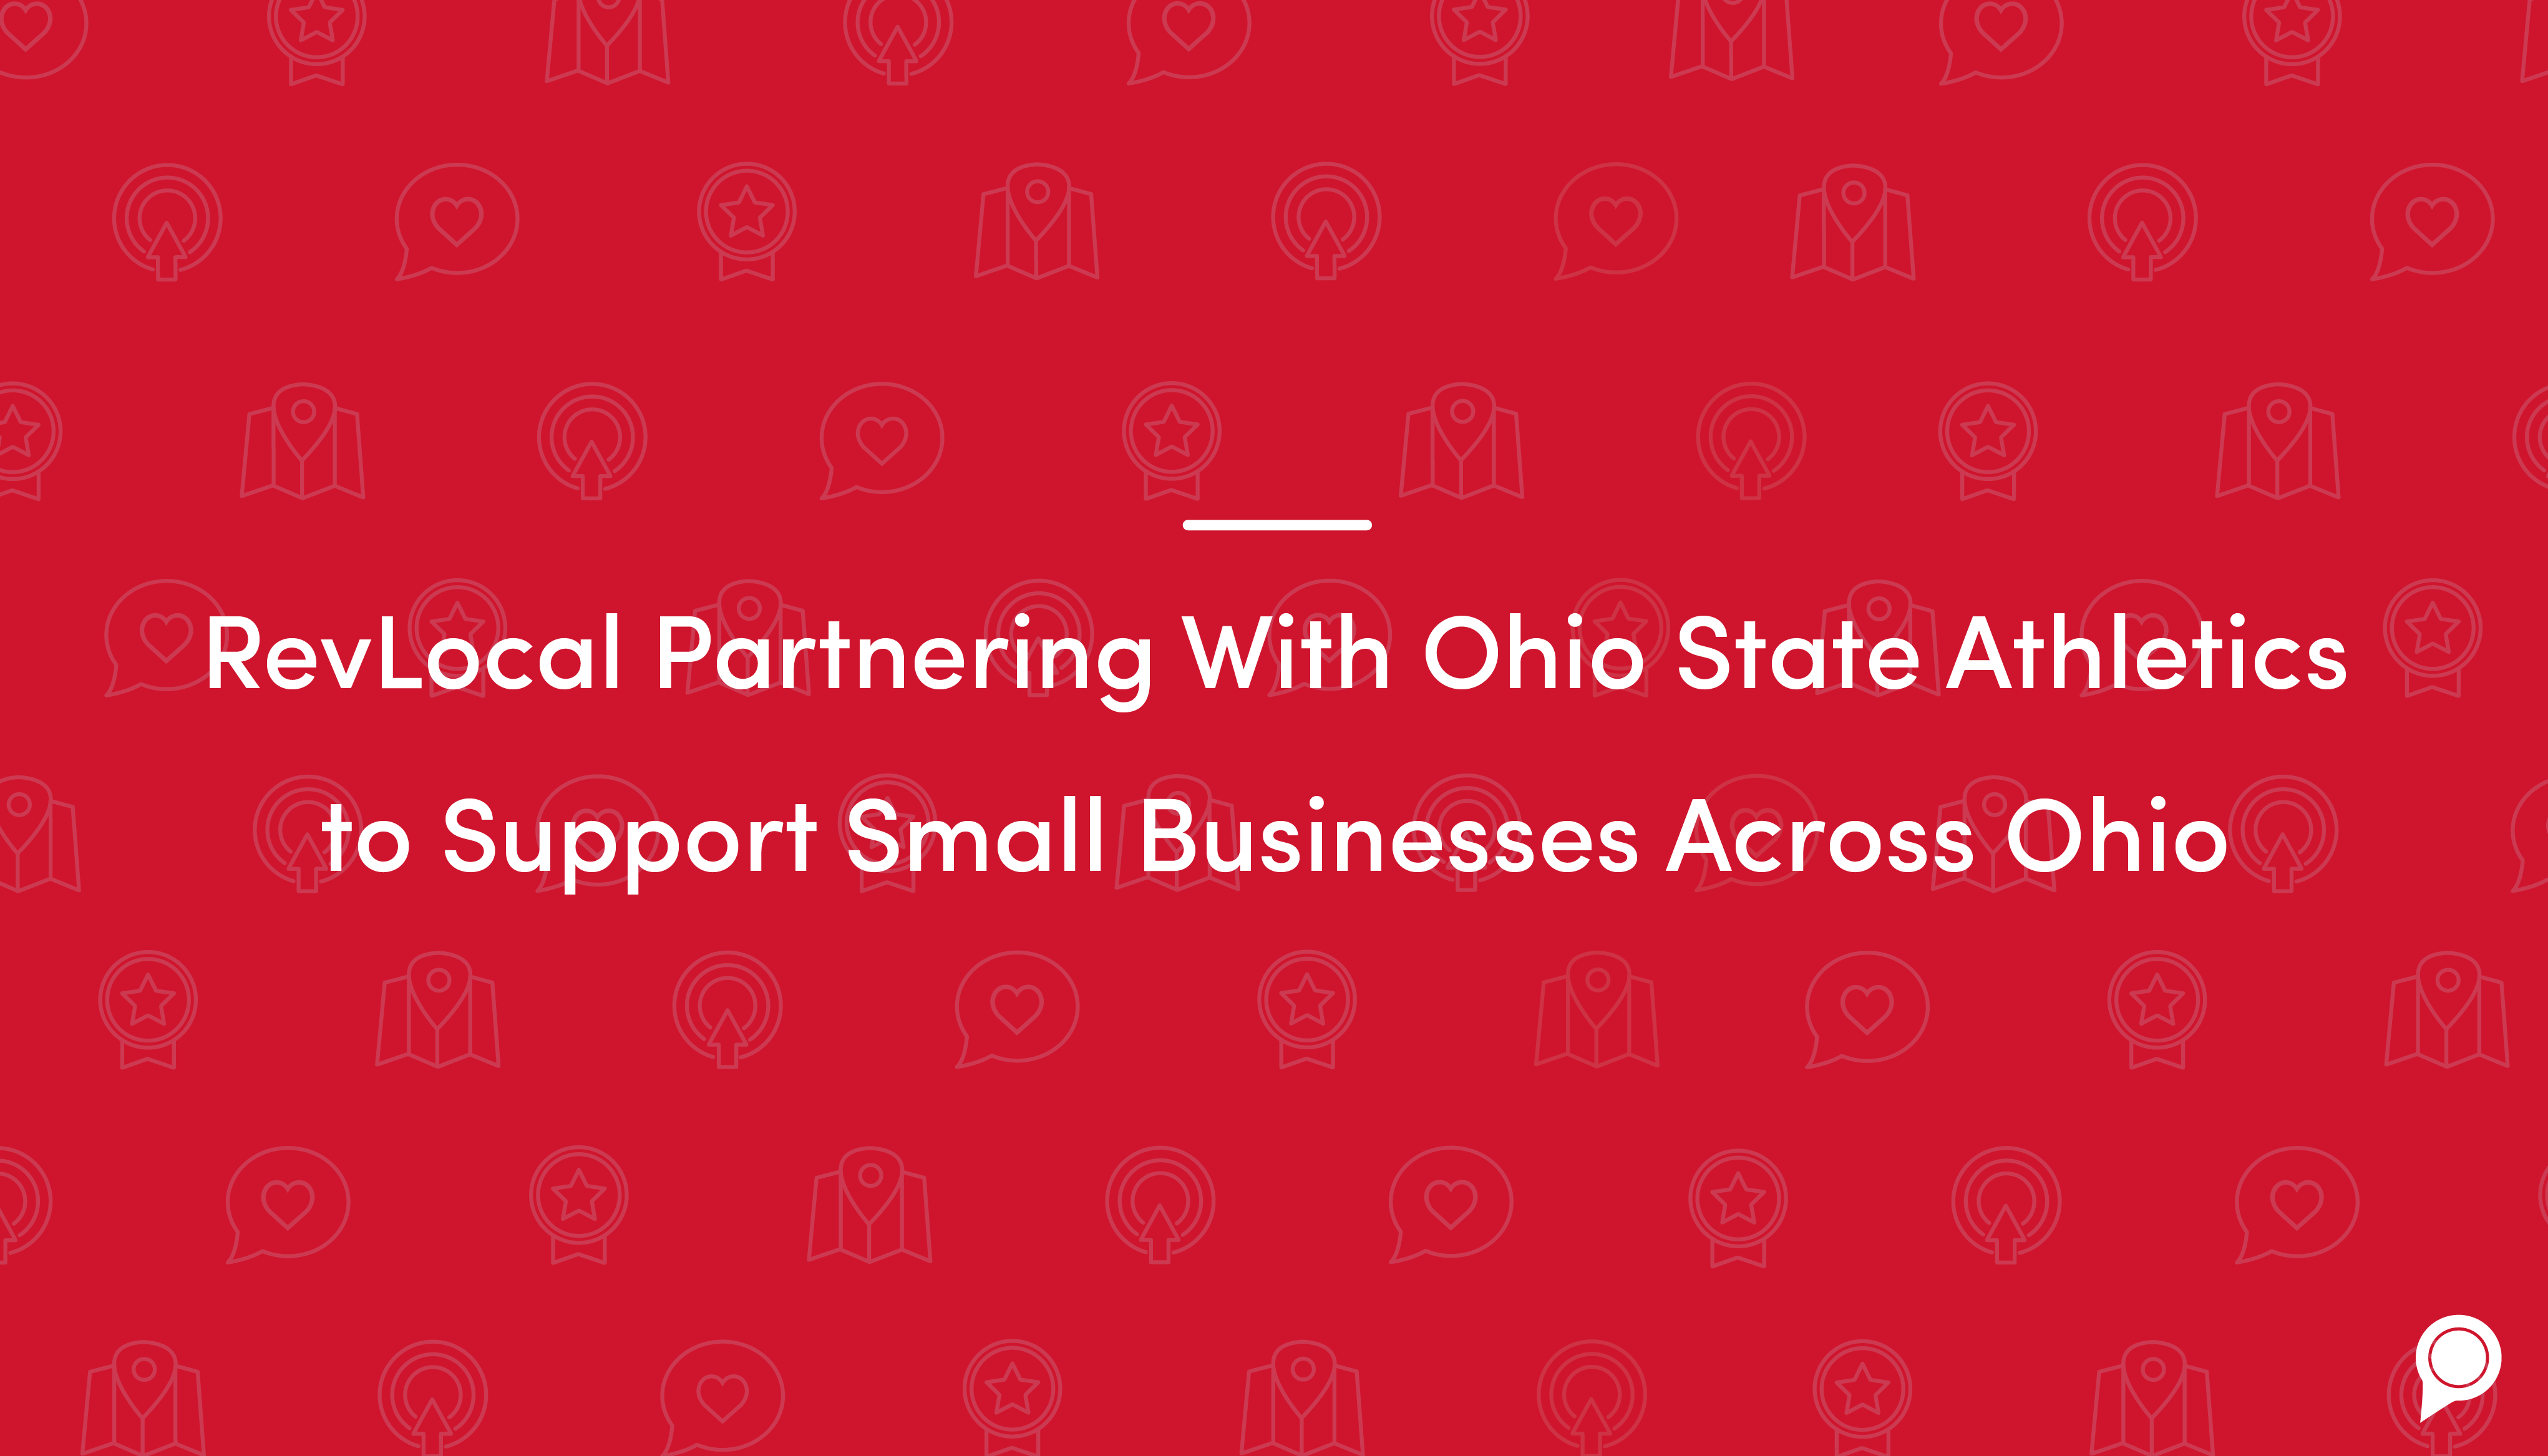 RevLocal Partnering With Ohio State Athletics to Support Small Businesses Across Ohio